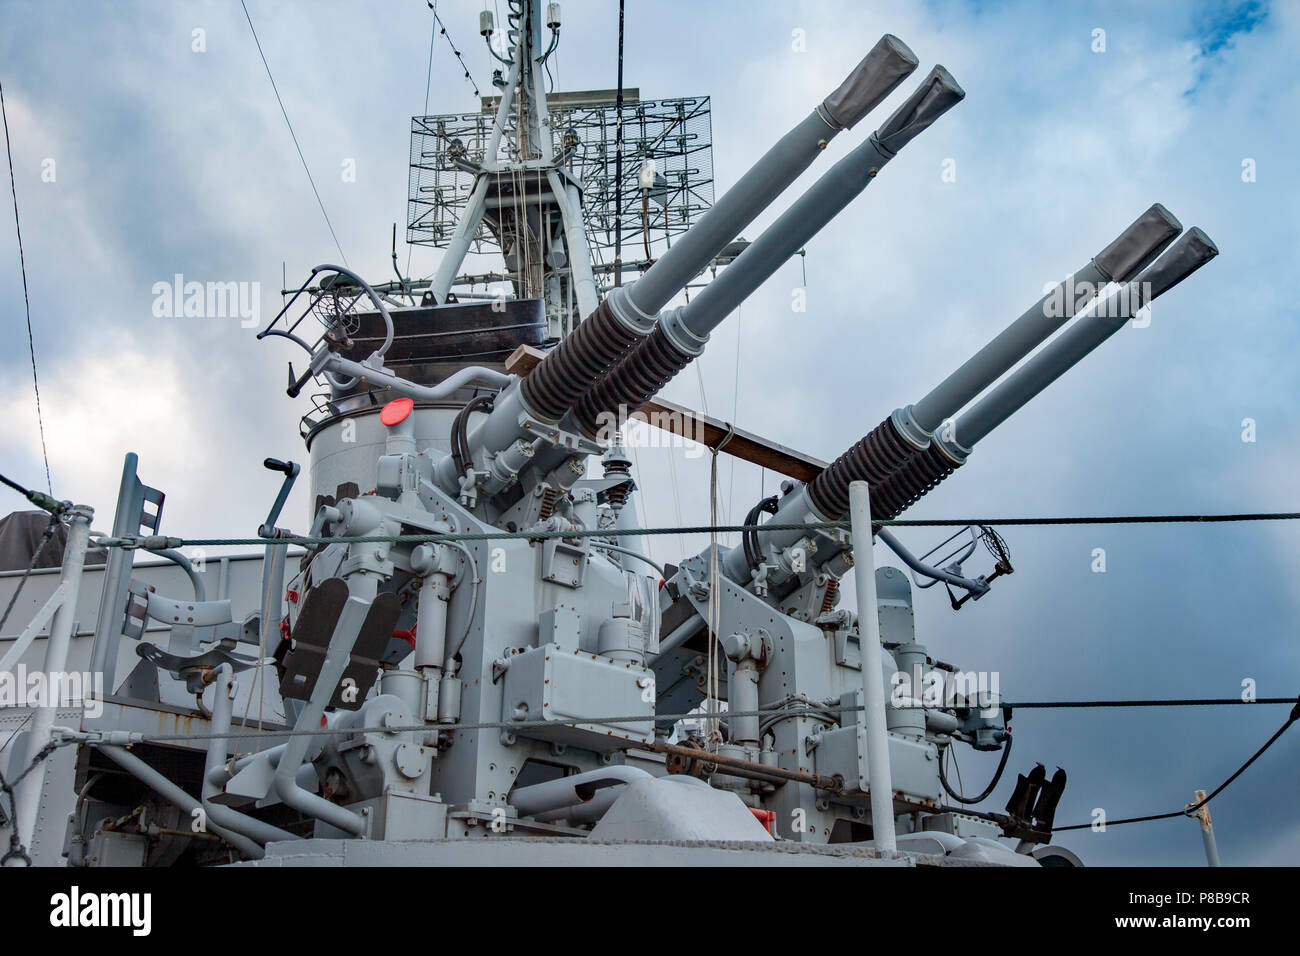 40mm Bofors anti-aircraft guns on the USS Casin Young - a WWII destroyer, in Boston Harbor, Massachusetts, USA Stock Photo